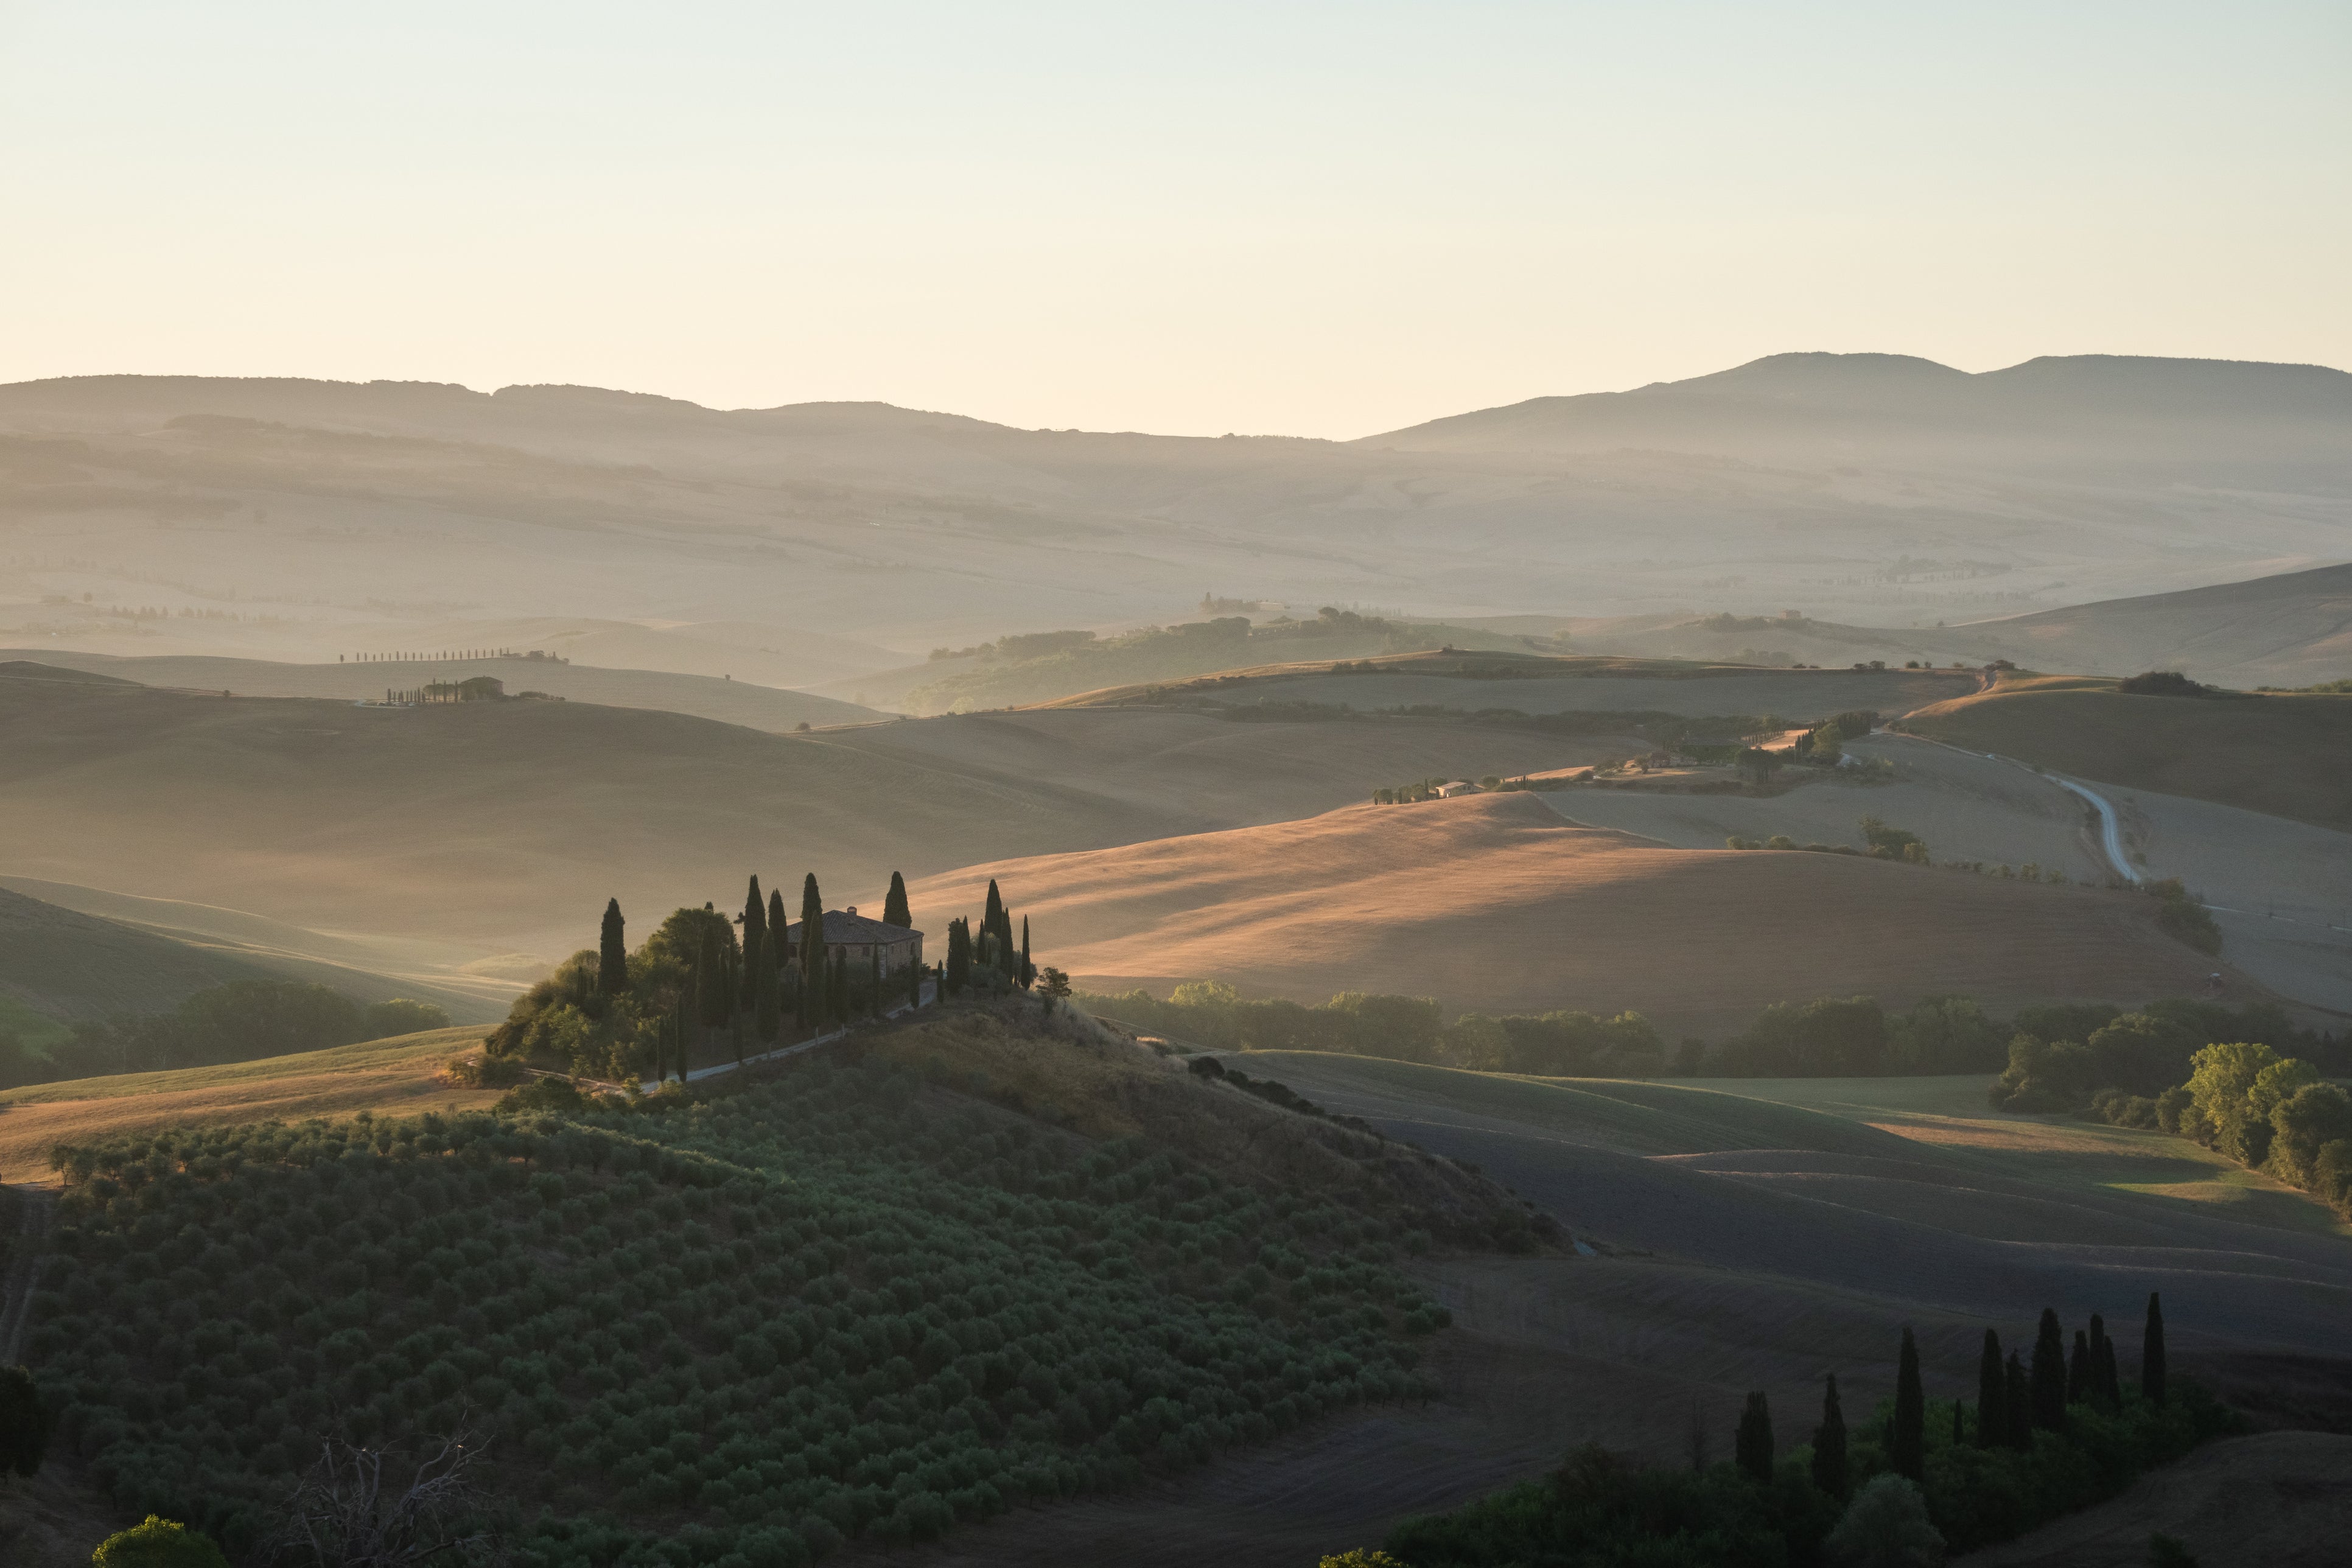 Head to Tuscany on an agritourism break